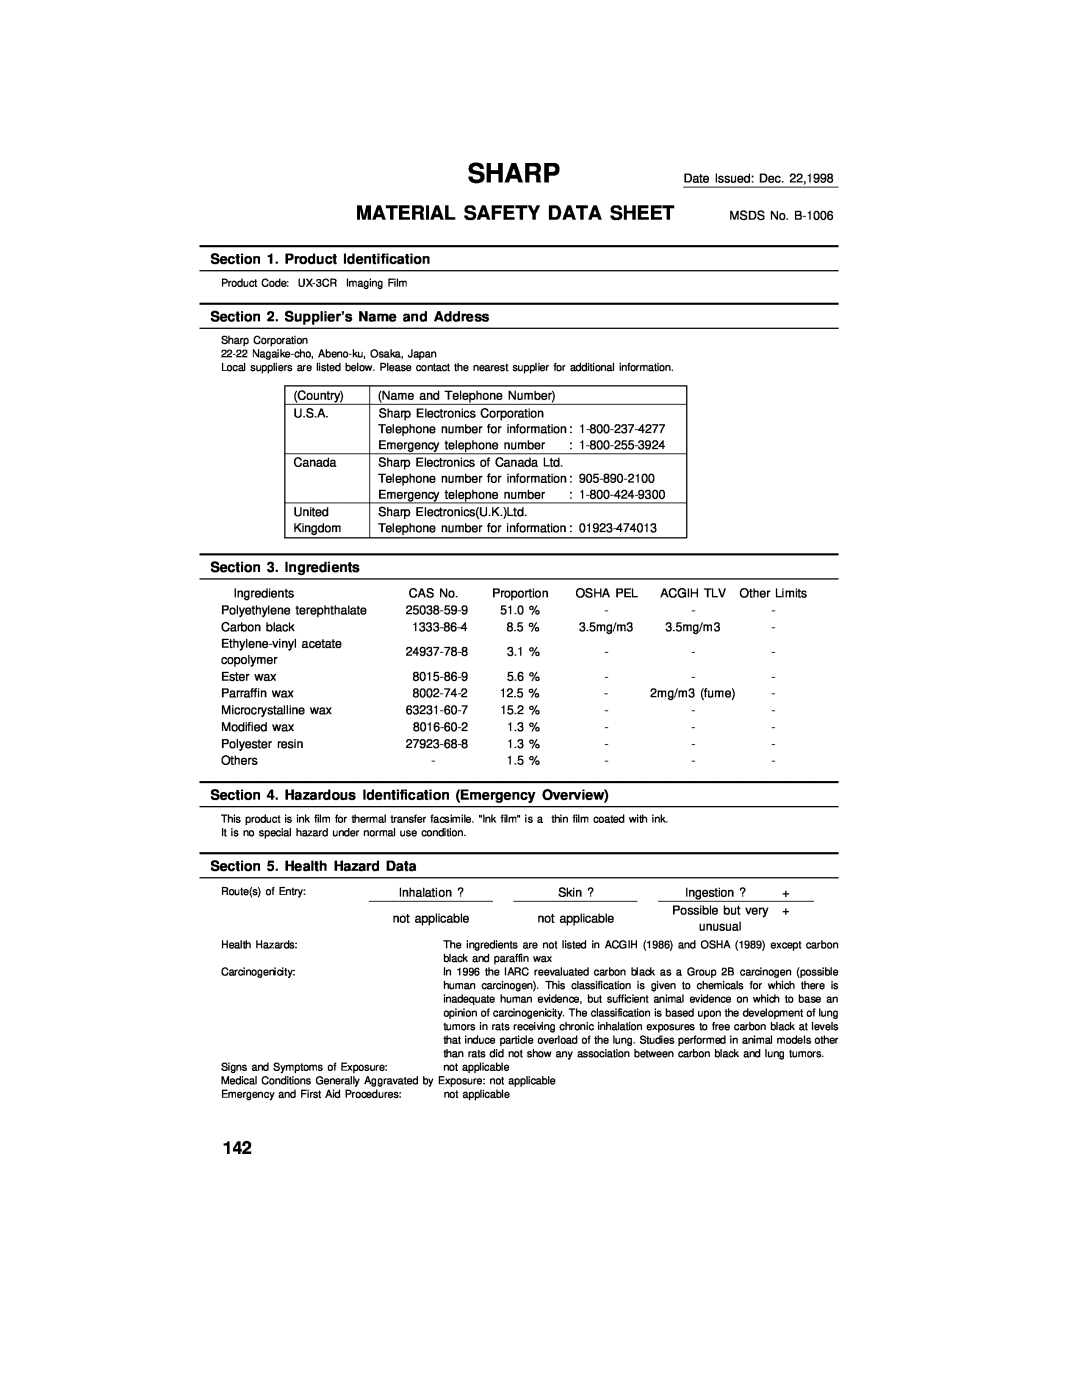 Sharp UX-460 Sharp, Material Safety Data Sheet, Product Identification, Supplier’s Name and Address, Ingredients 